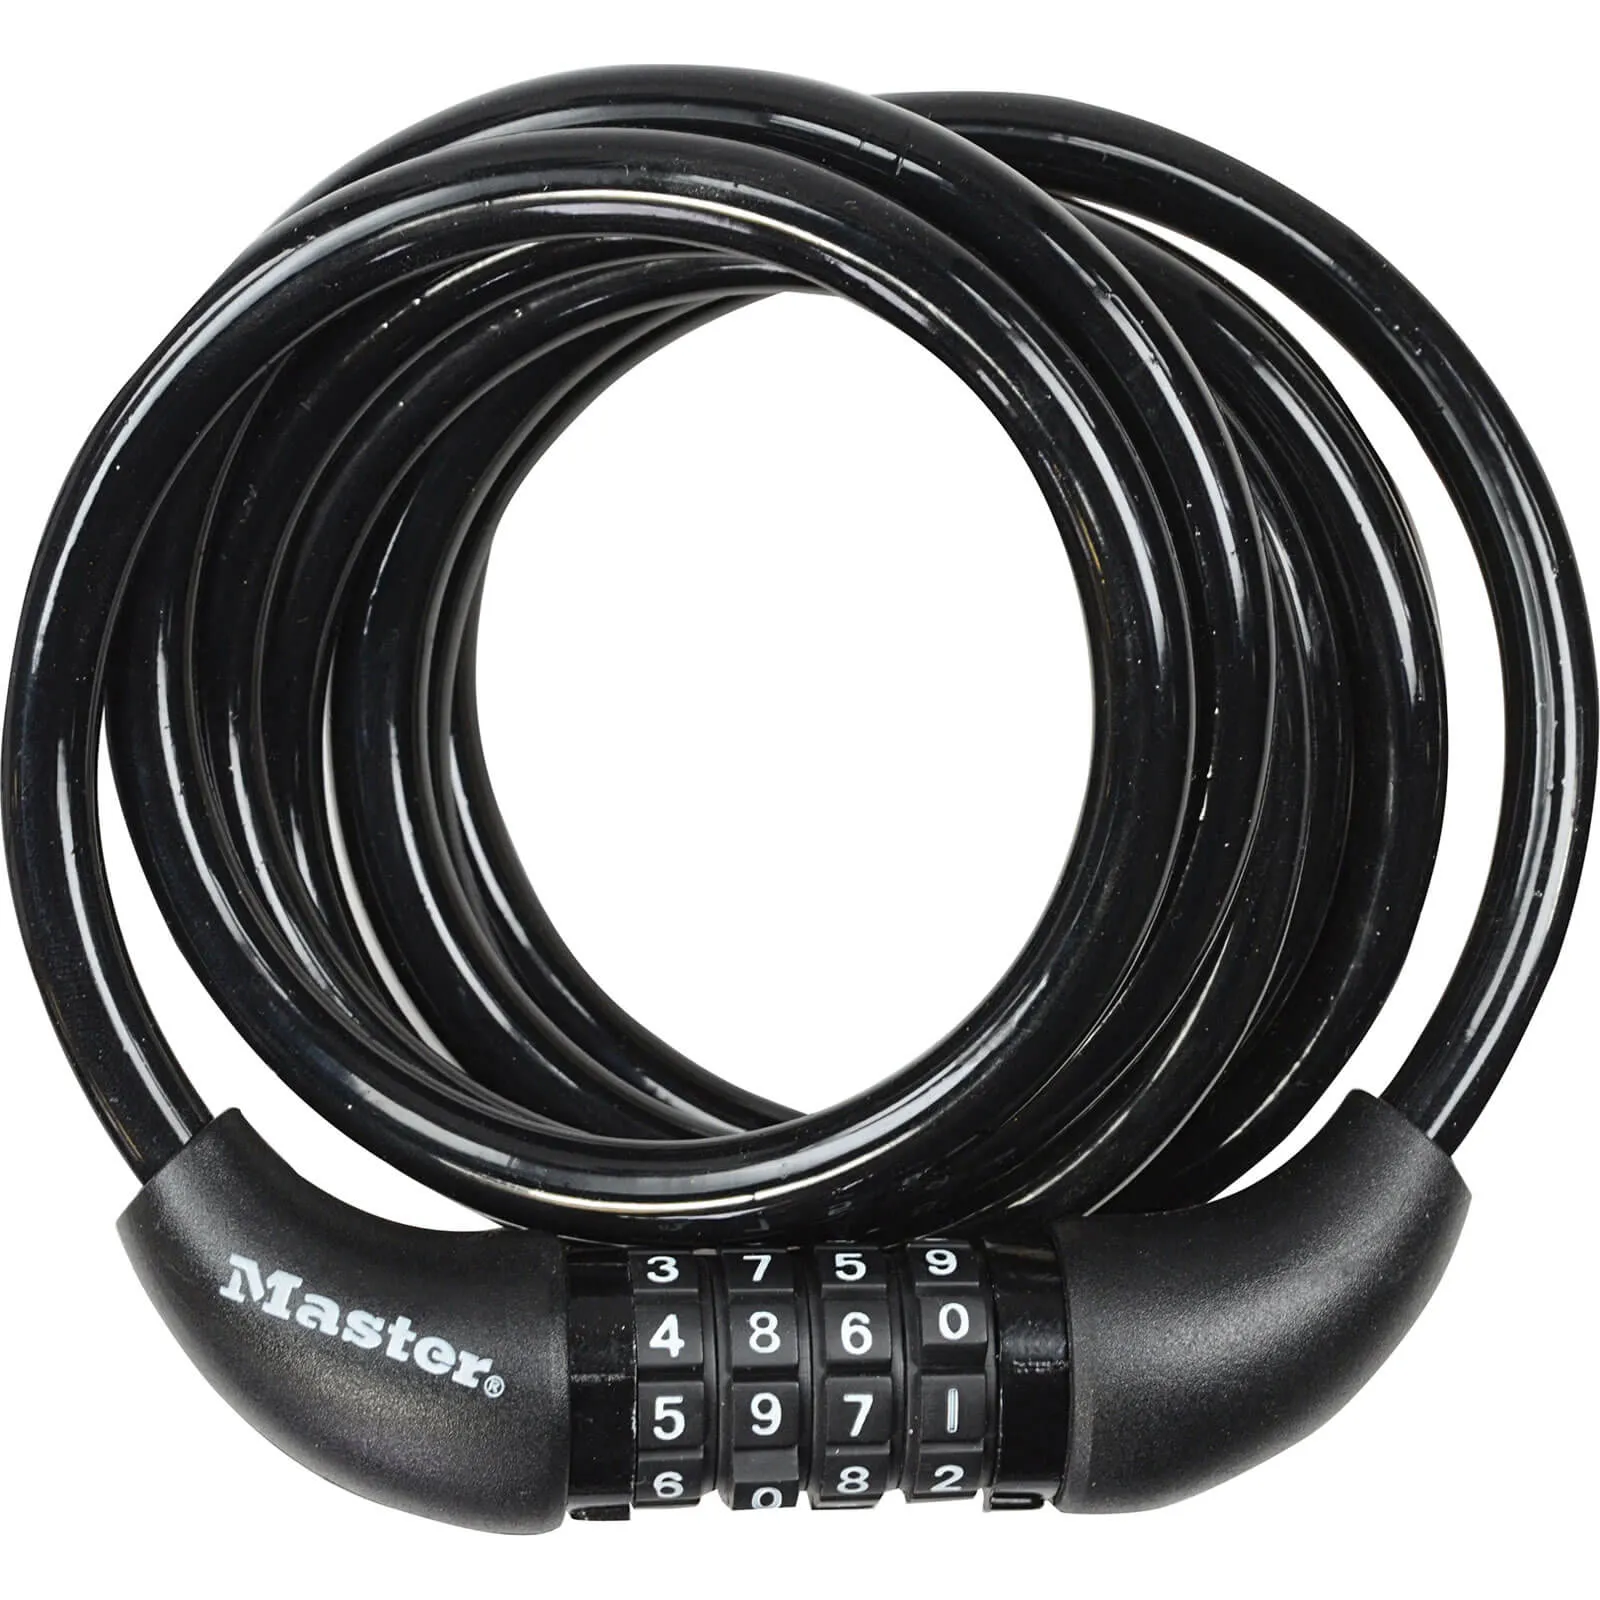 Master Lock Self Coiling Combination Cable Lock - 8mm, 1800mm